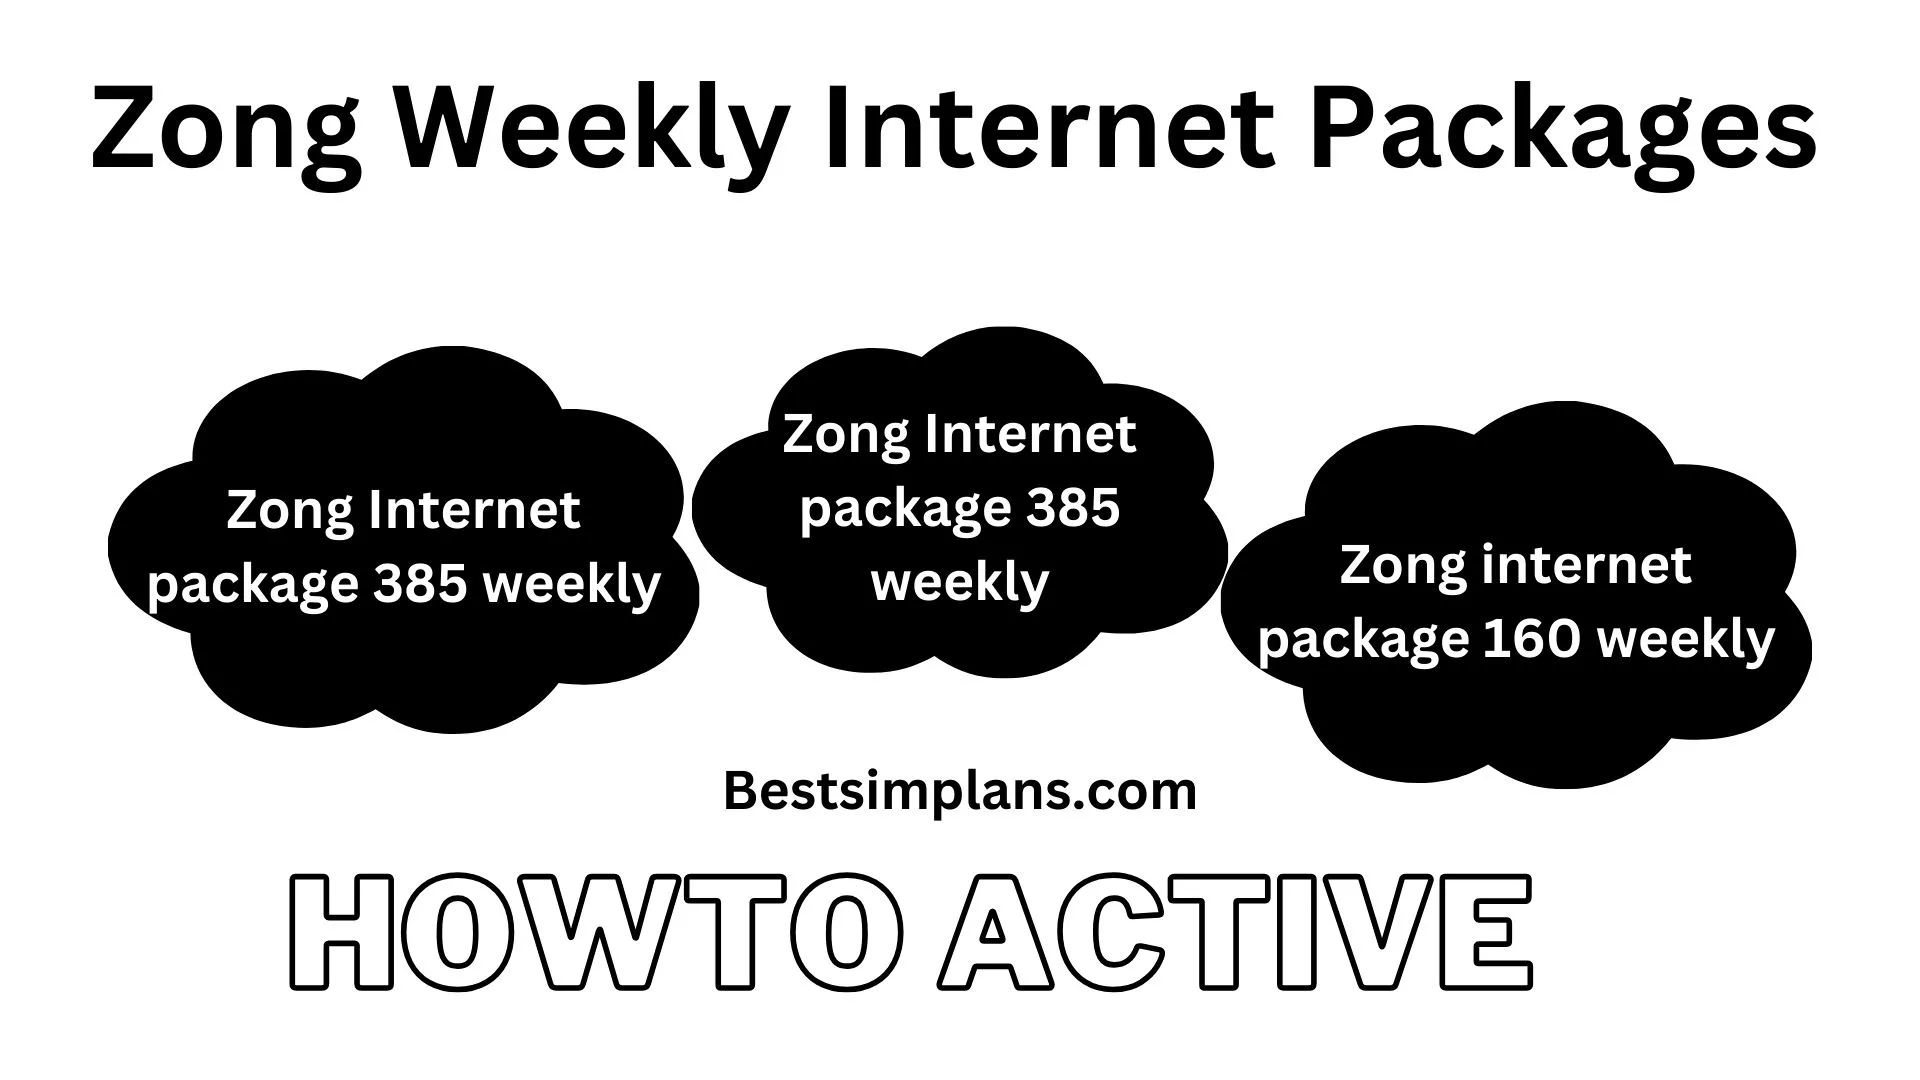 Zong weekly internet packages code 100 rupees